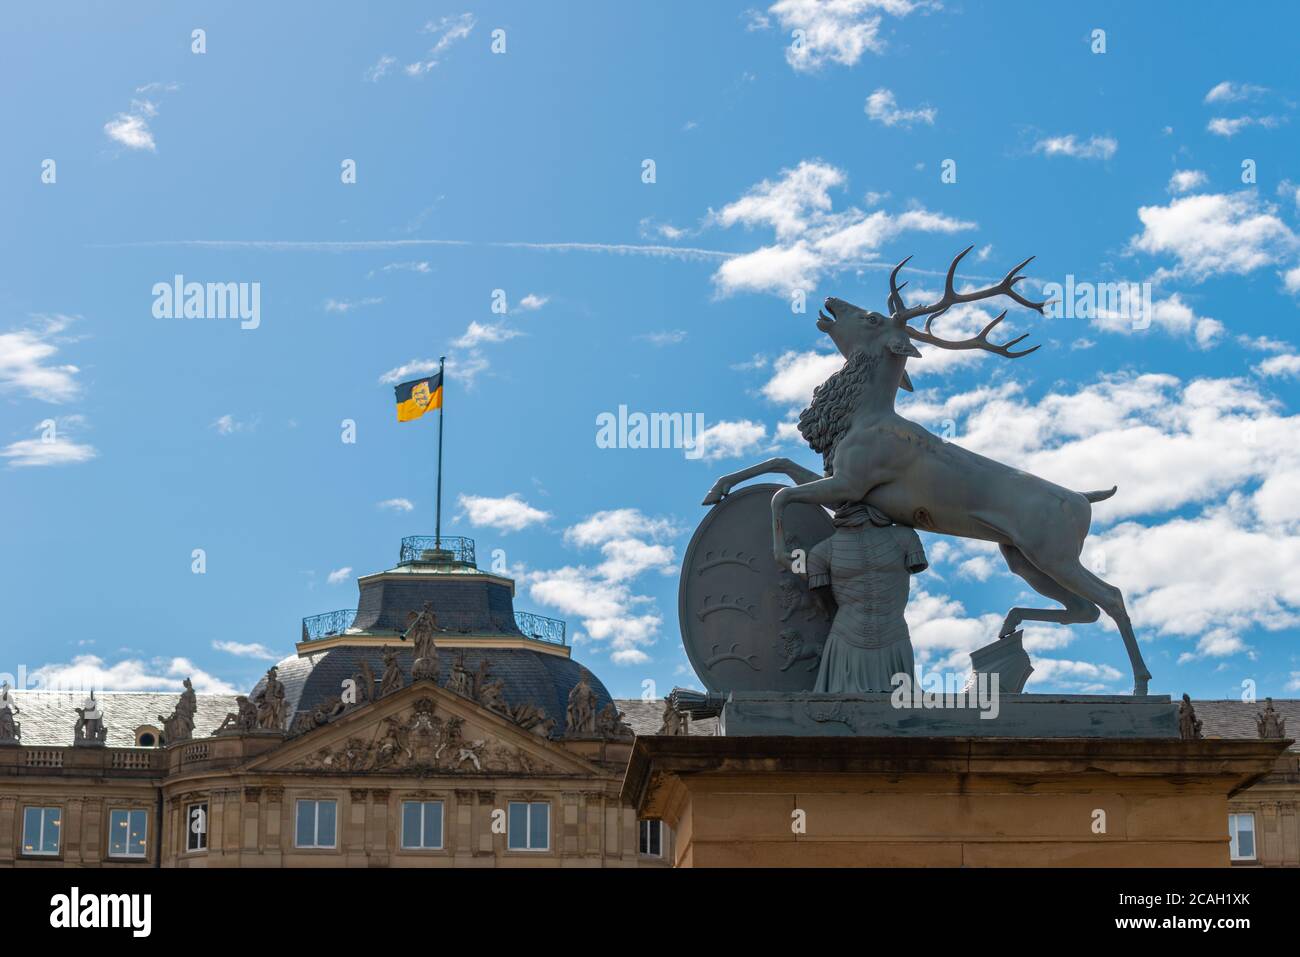 Neues Schloss or New Palace at Schlossplatz or Castle Square in the inner  city , Stuttgart, Federal State Baden-Württemberg, South Germany, Europe Stock Photo